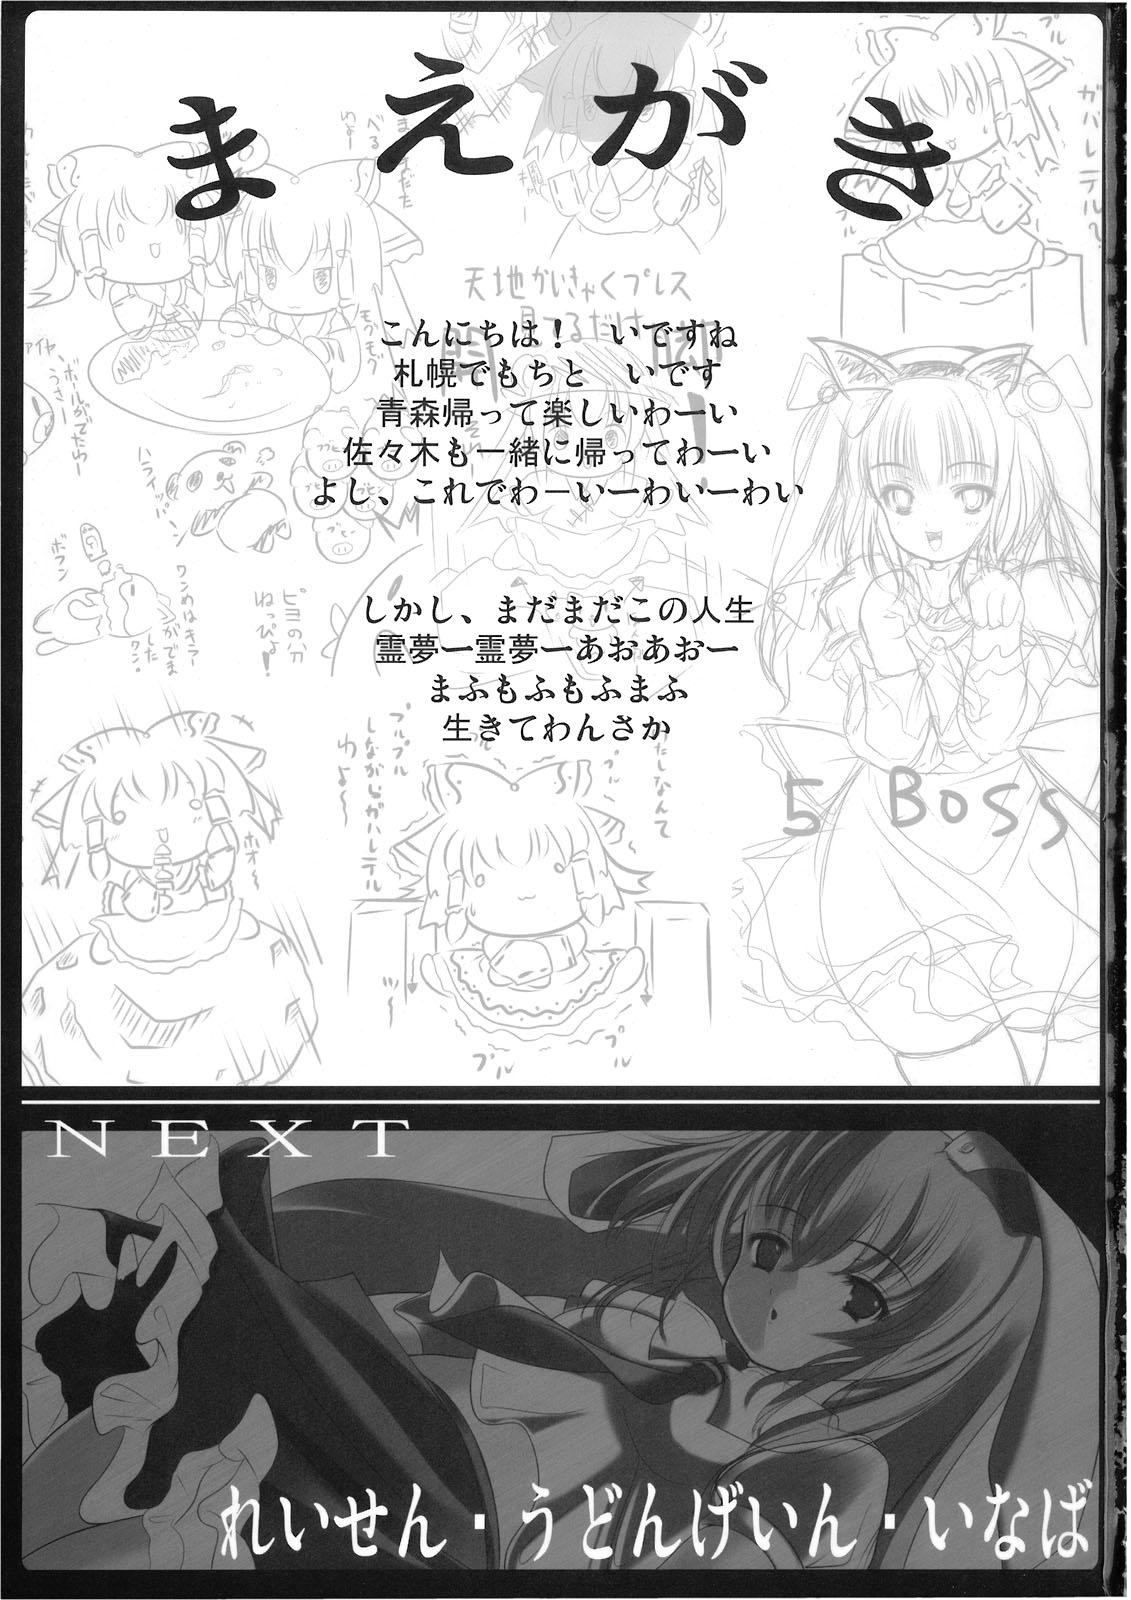 Threesome 幻想郷 爆!! - Touhou project Gay Uncut - Picture 3